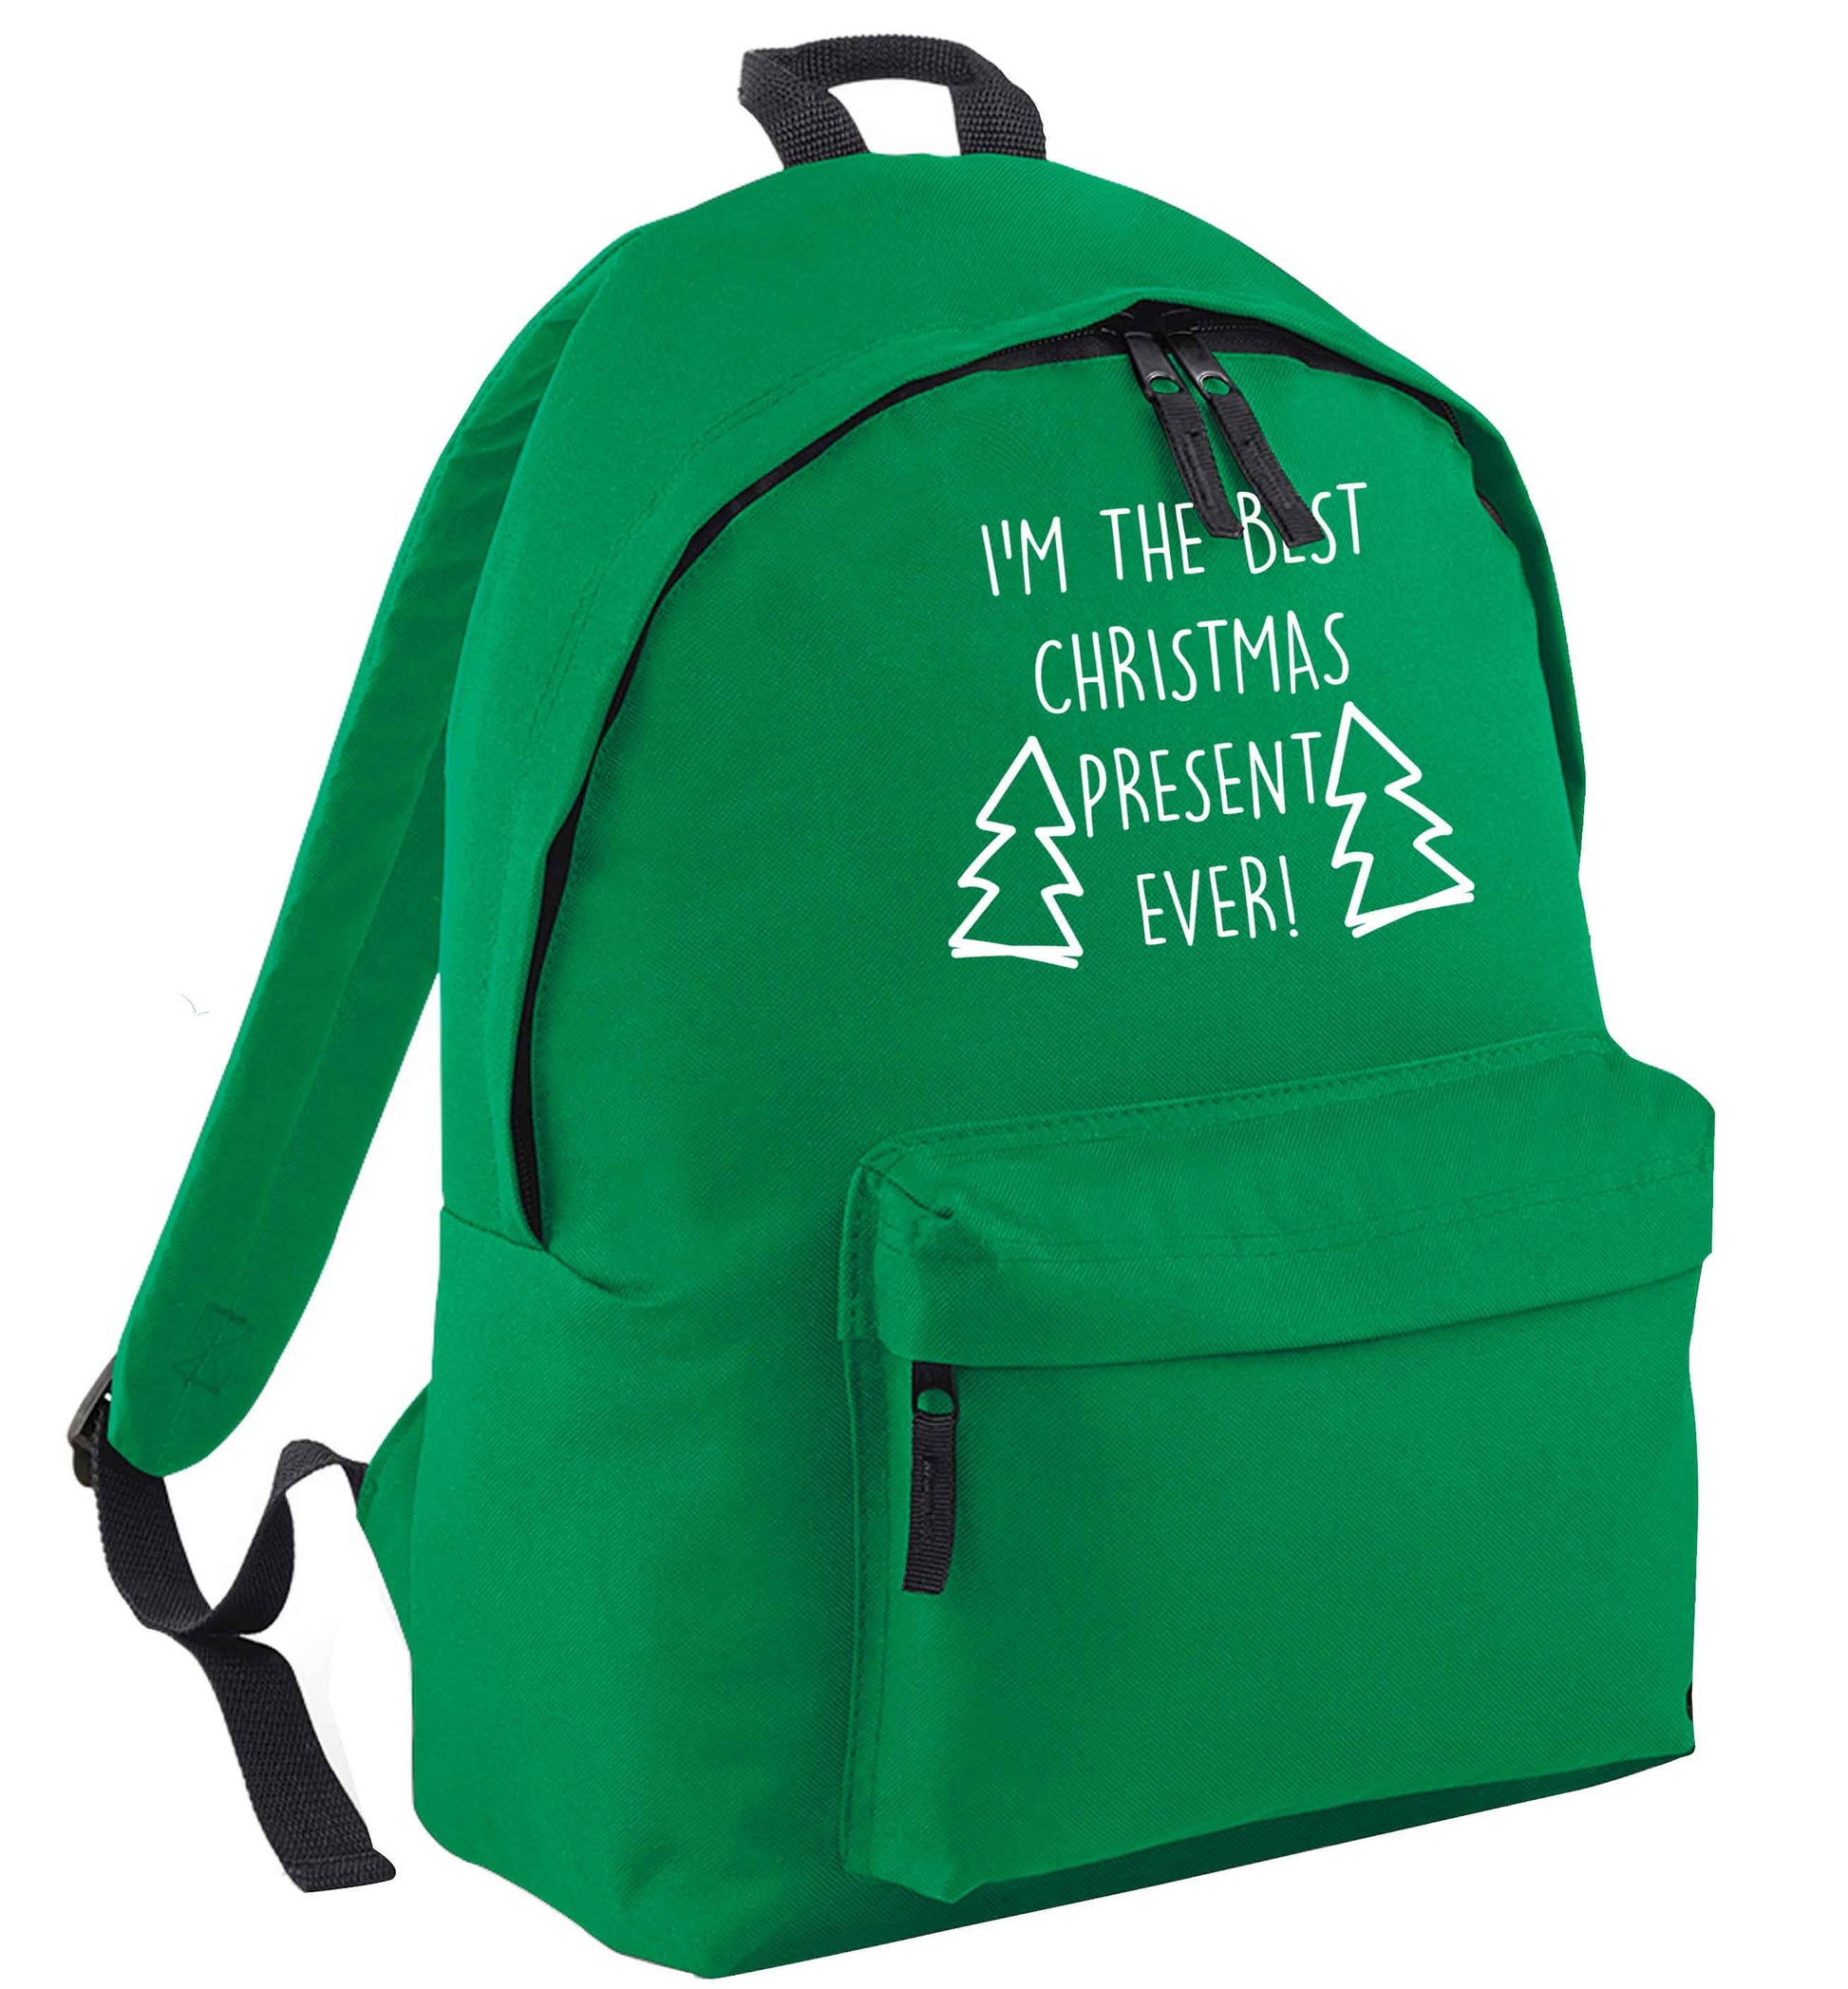 I'm the best Christmas present ever green adults backpack